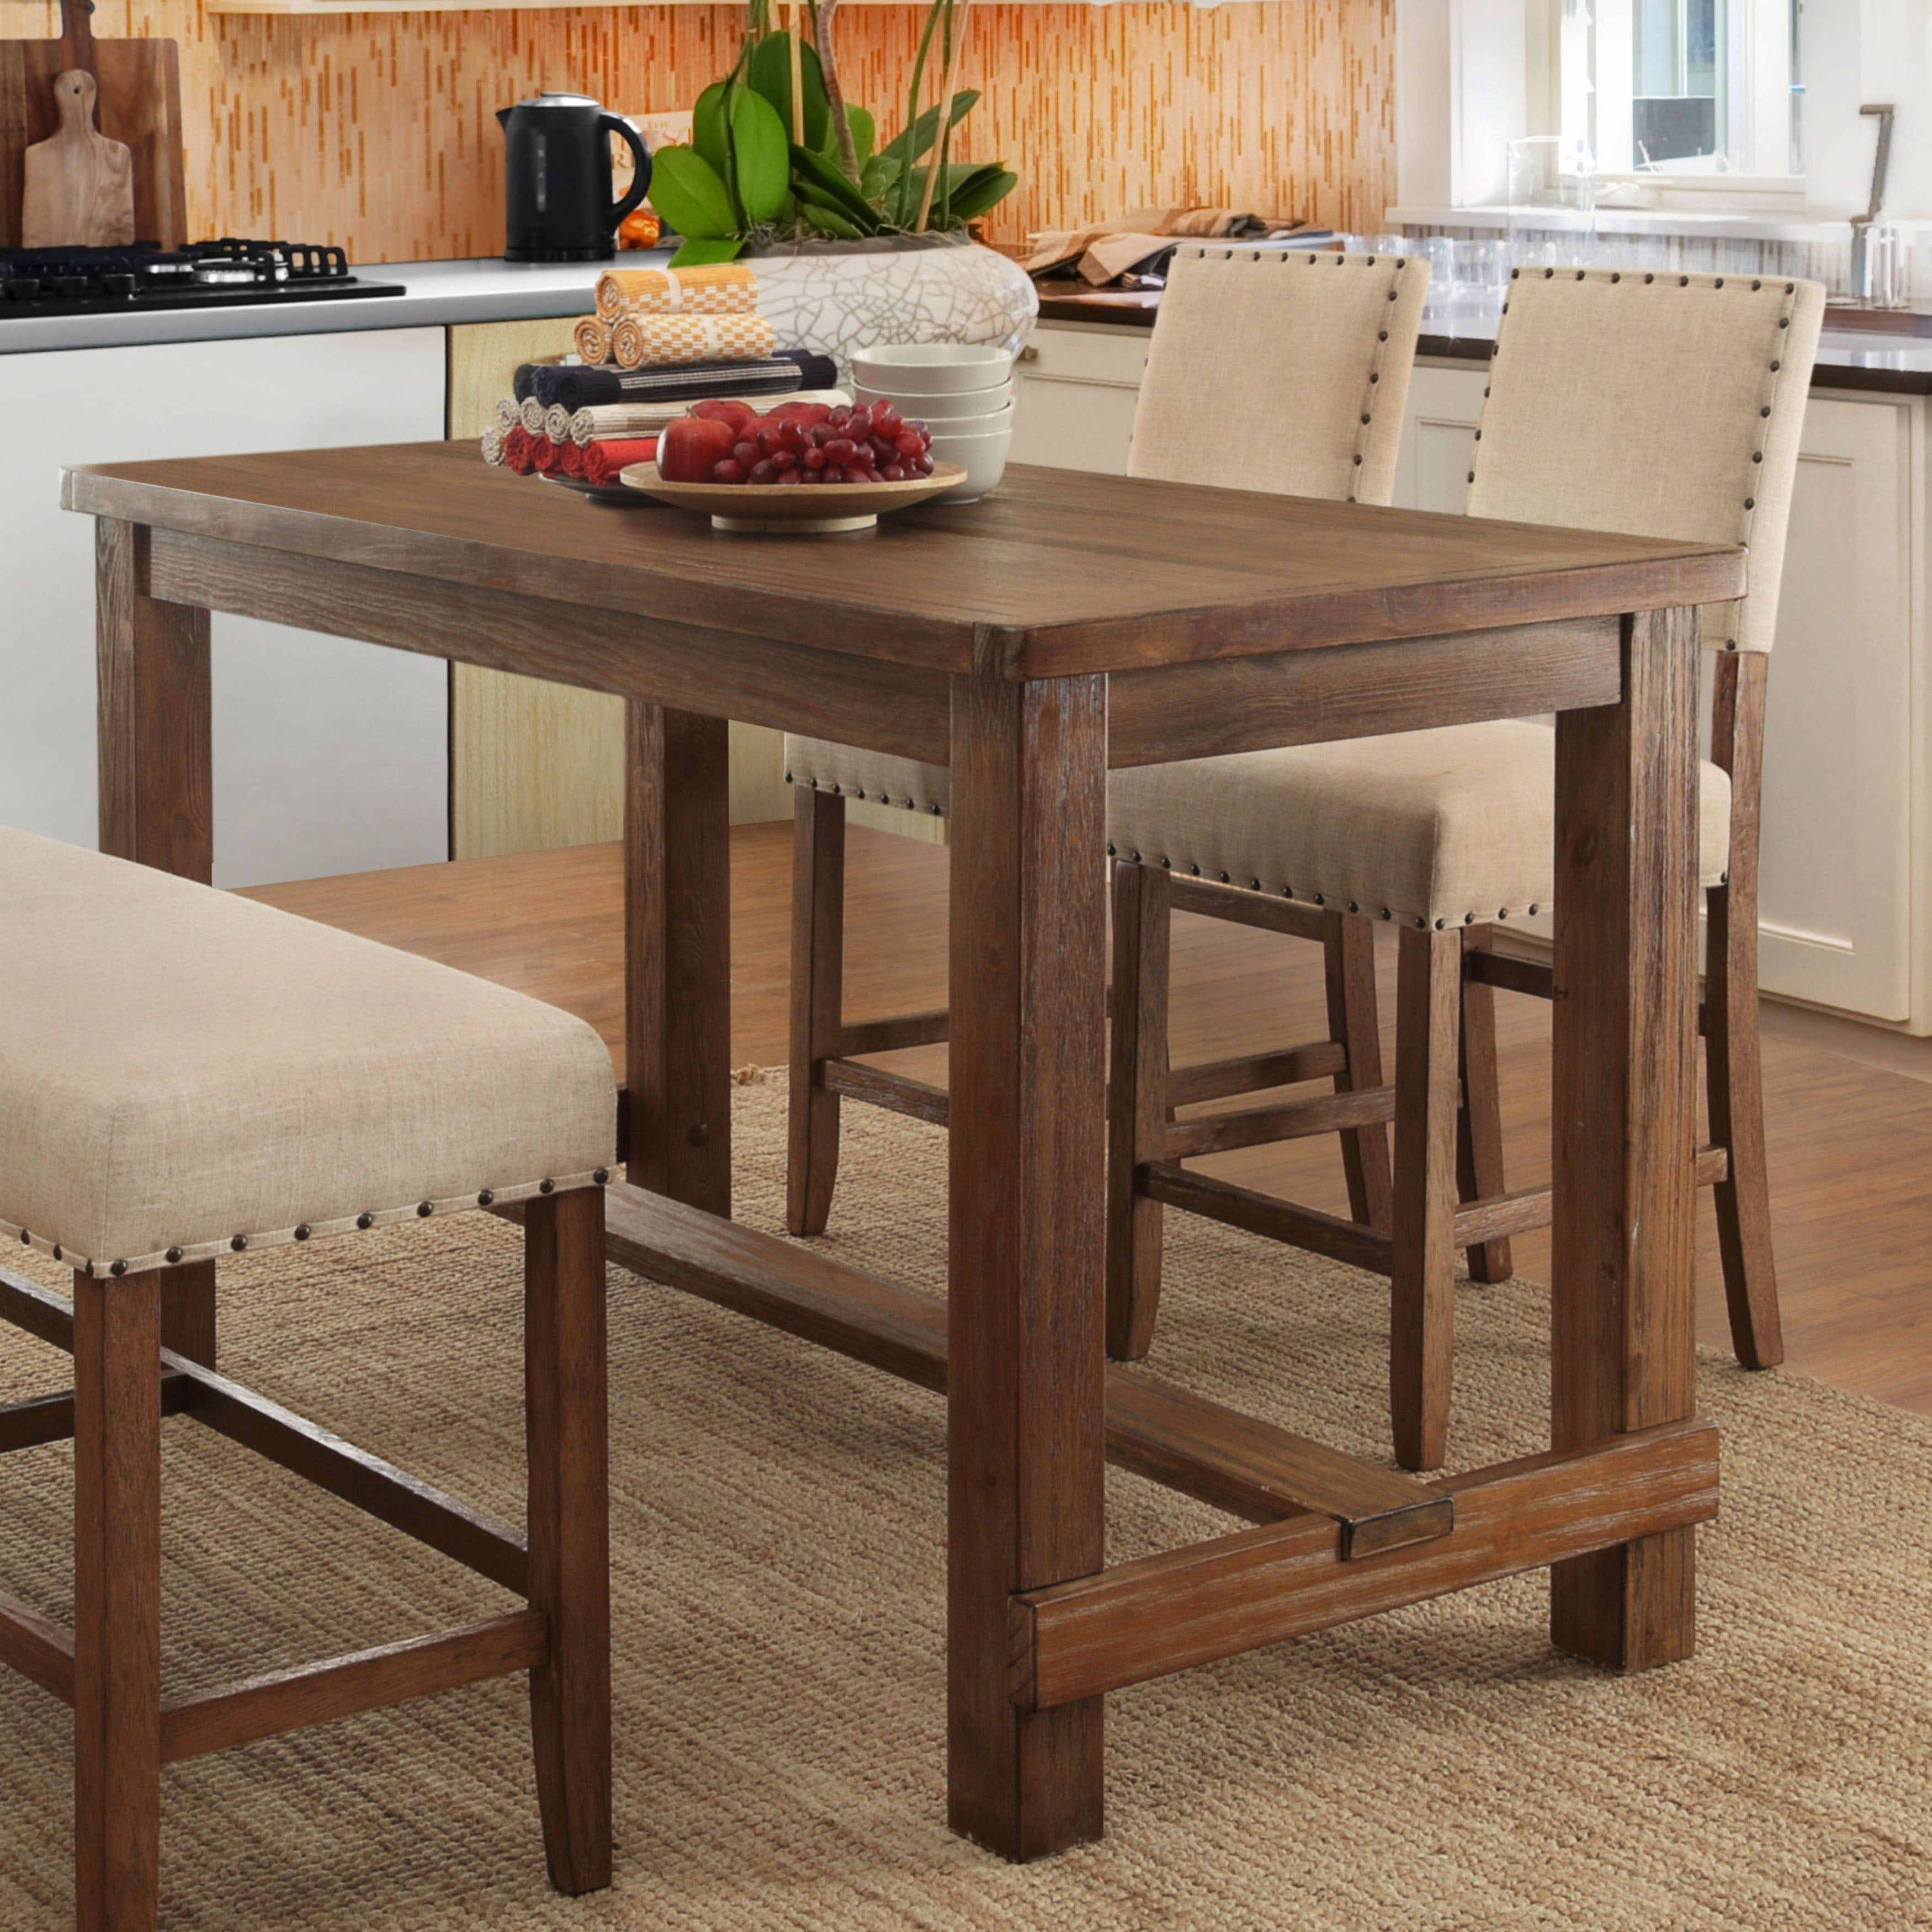 Current Buy Furniture Of America Kitchen & Dining Room Tables Online At Throughout Biggs 5 Piece Counter Height Solid Wood Dining Sets (set Of 5) (View 10 of 20)